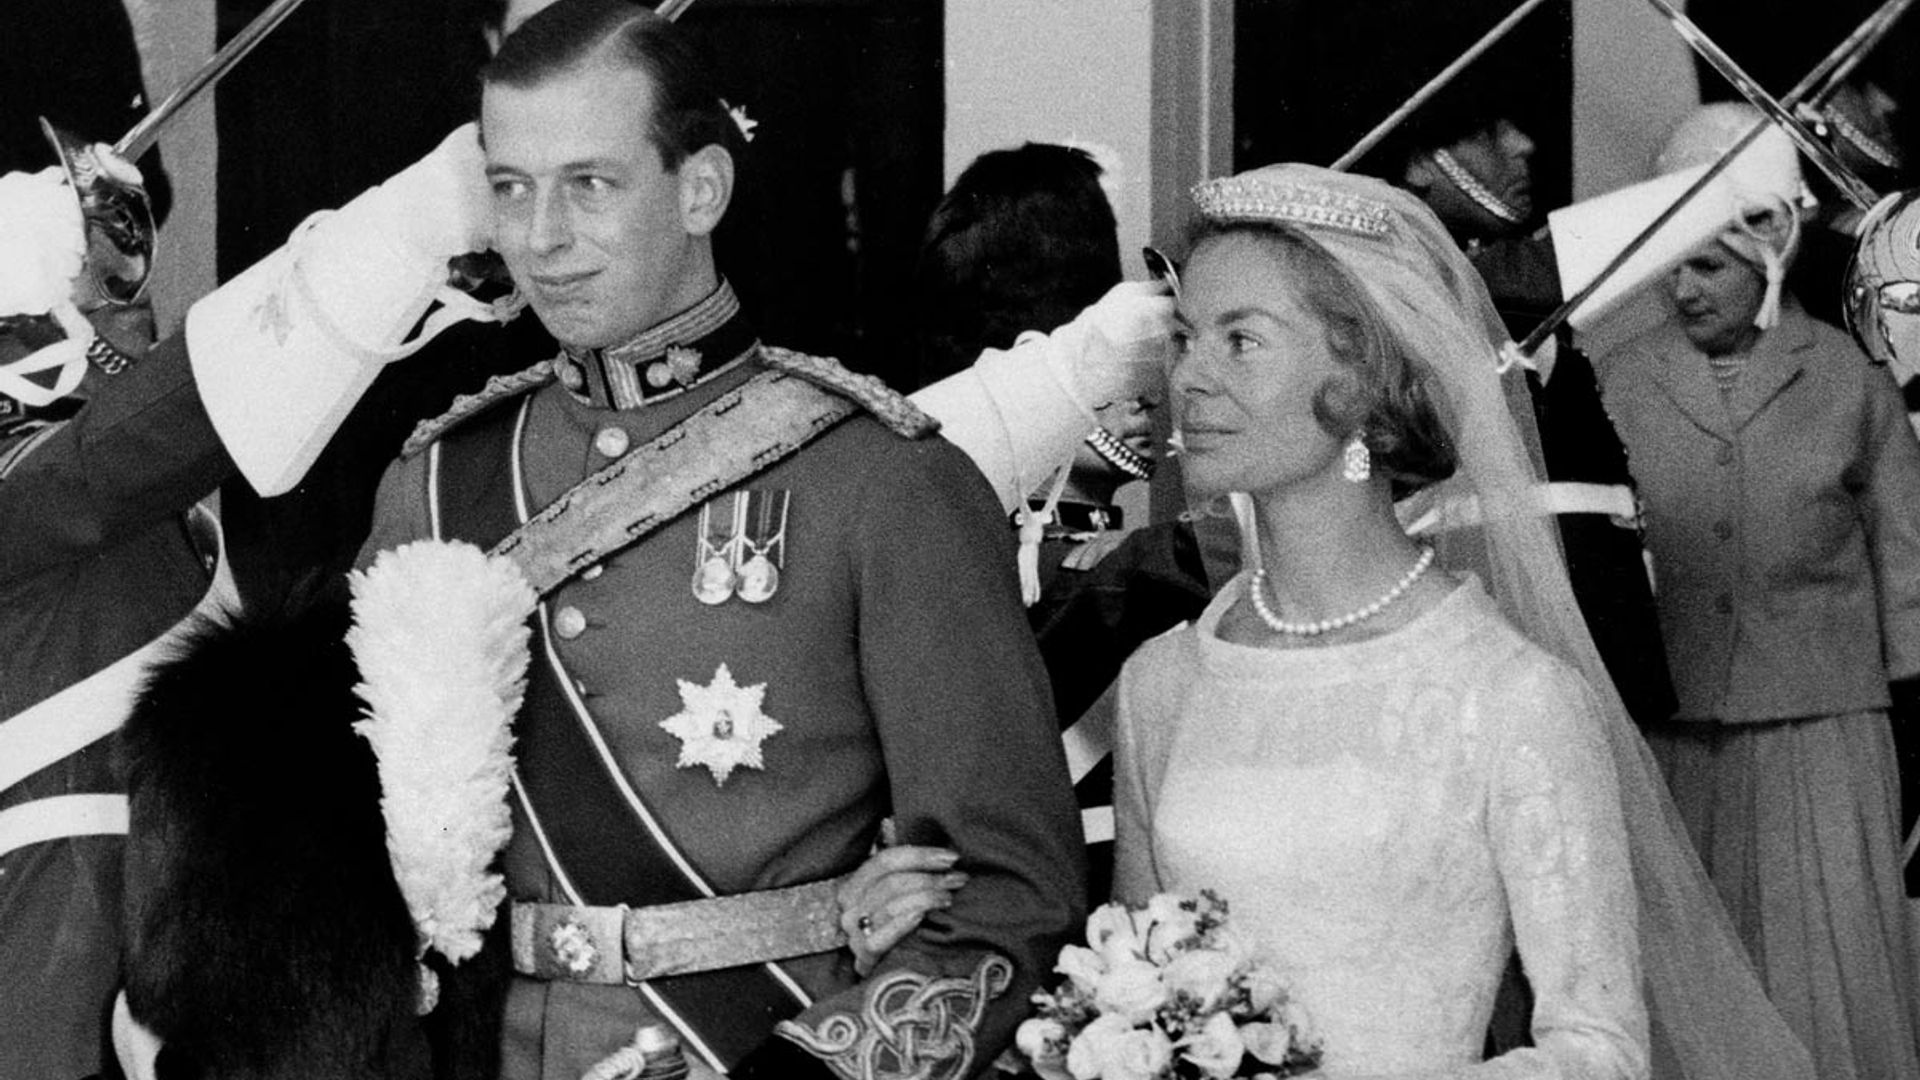 The Queen's cousin's delayed wedding broke 600-year tradition